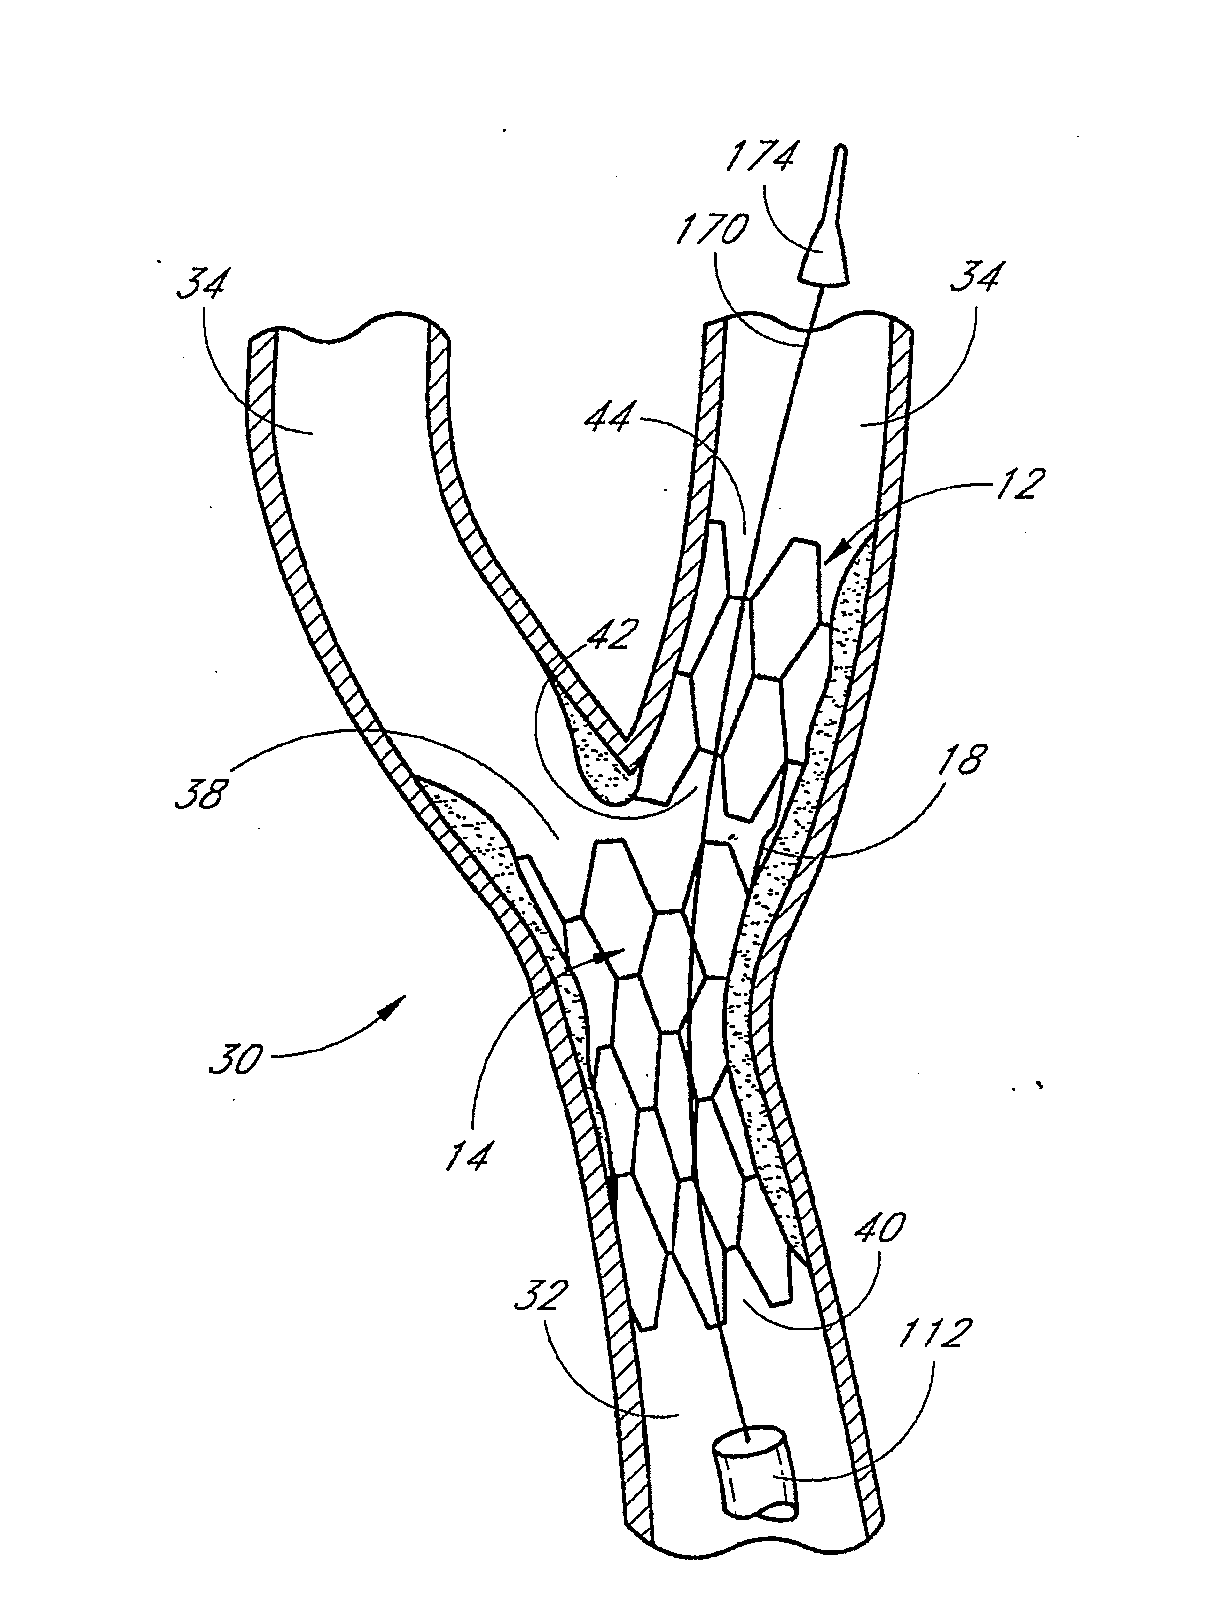 Bifurcation stent and method of positioning in a body lumen